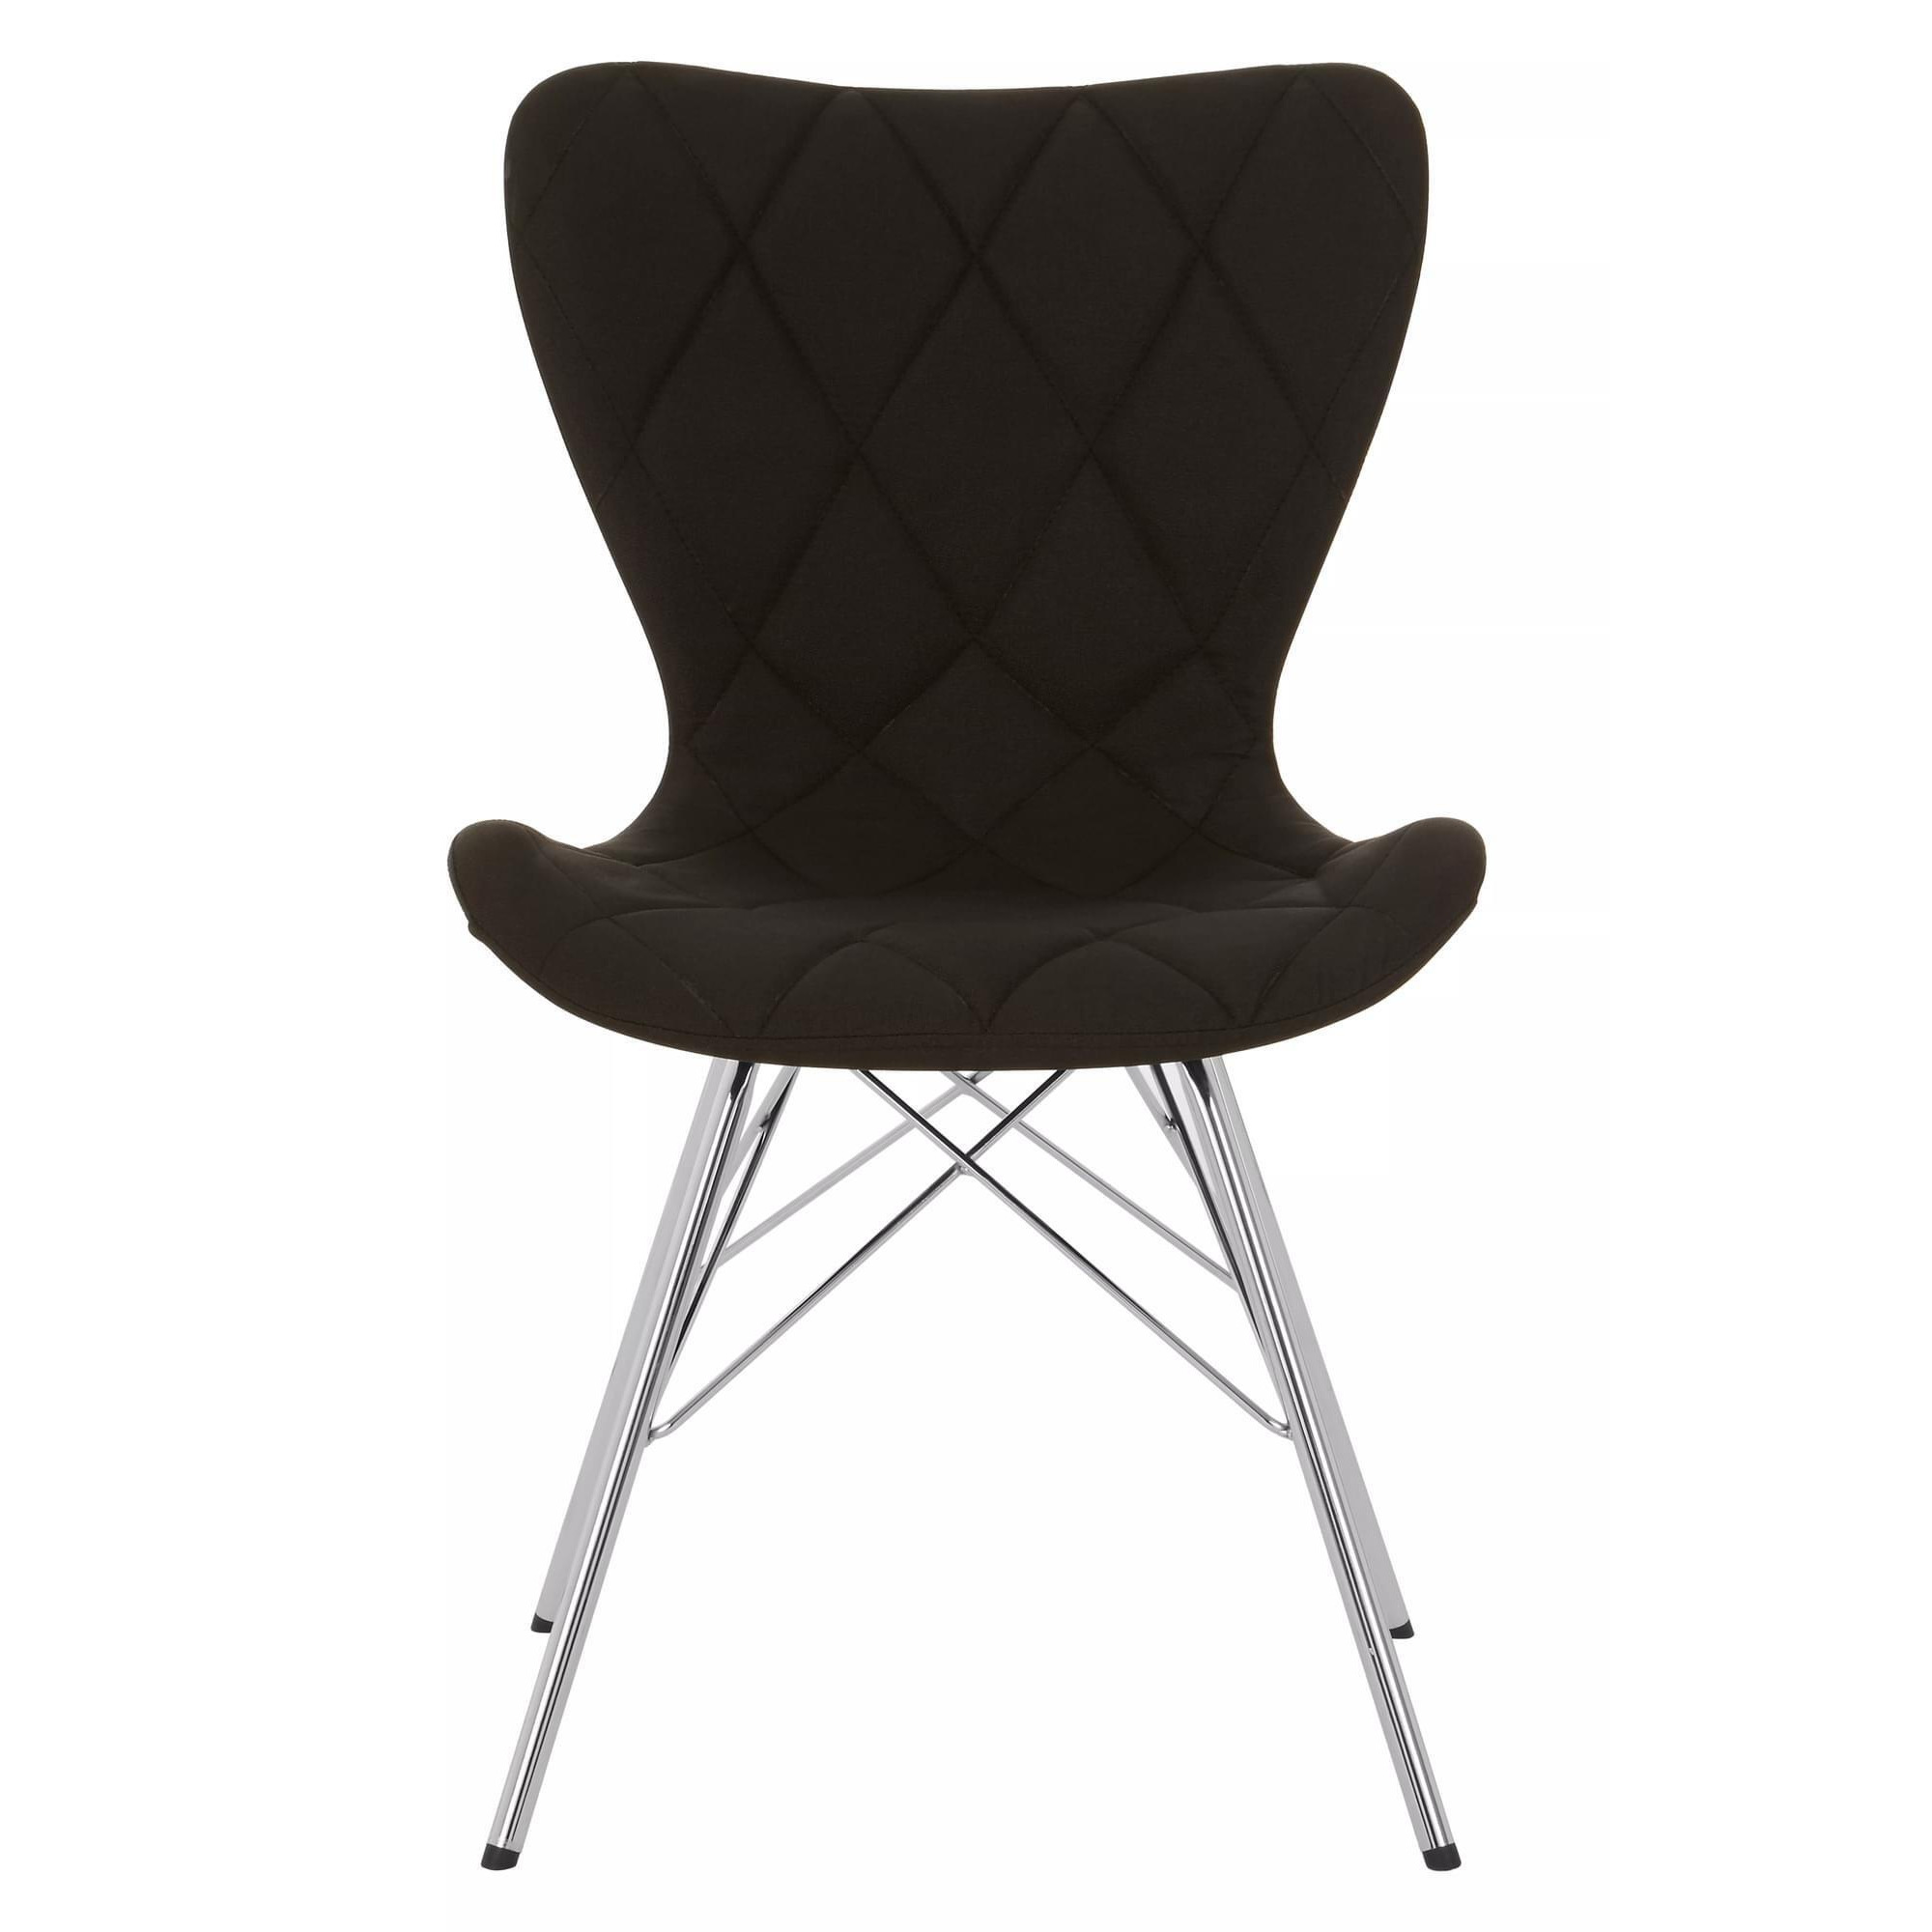 Interiors by Premier Stockholm Dining Chair - image 1